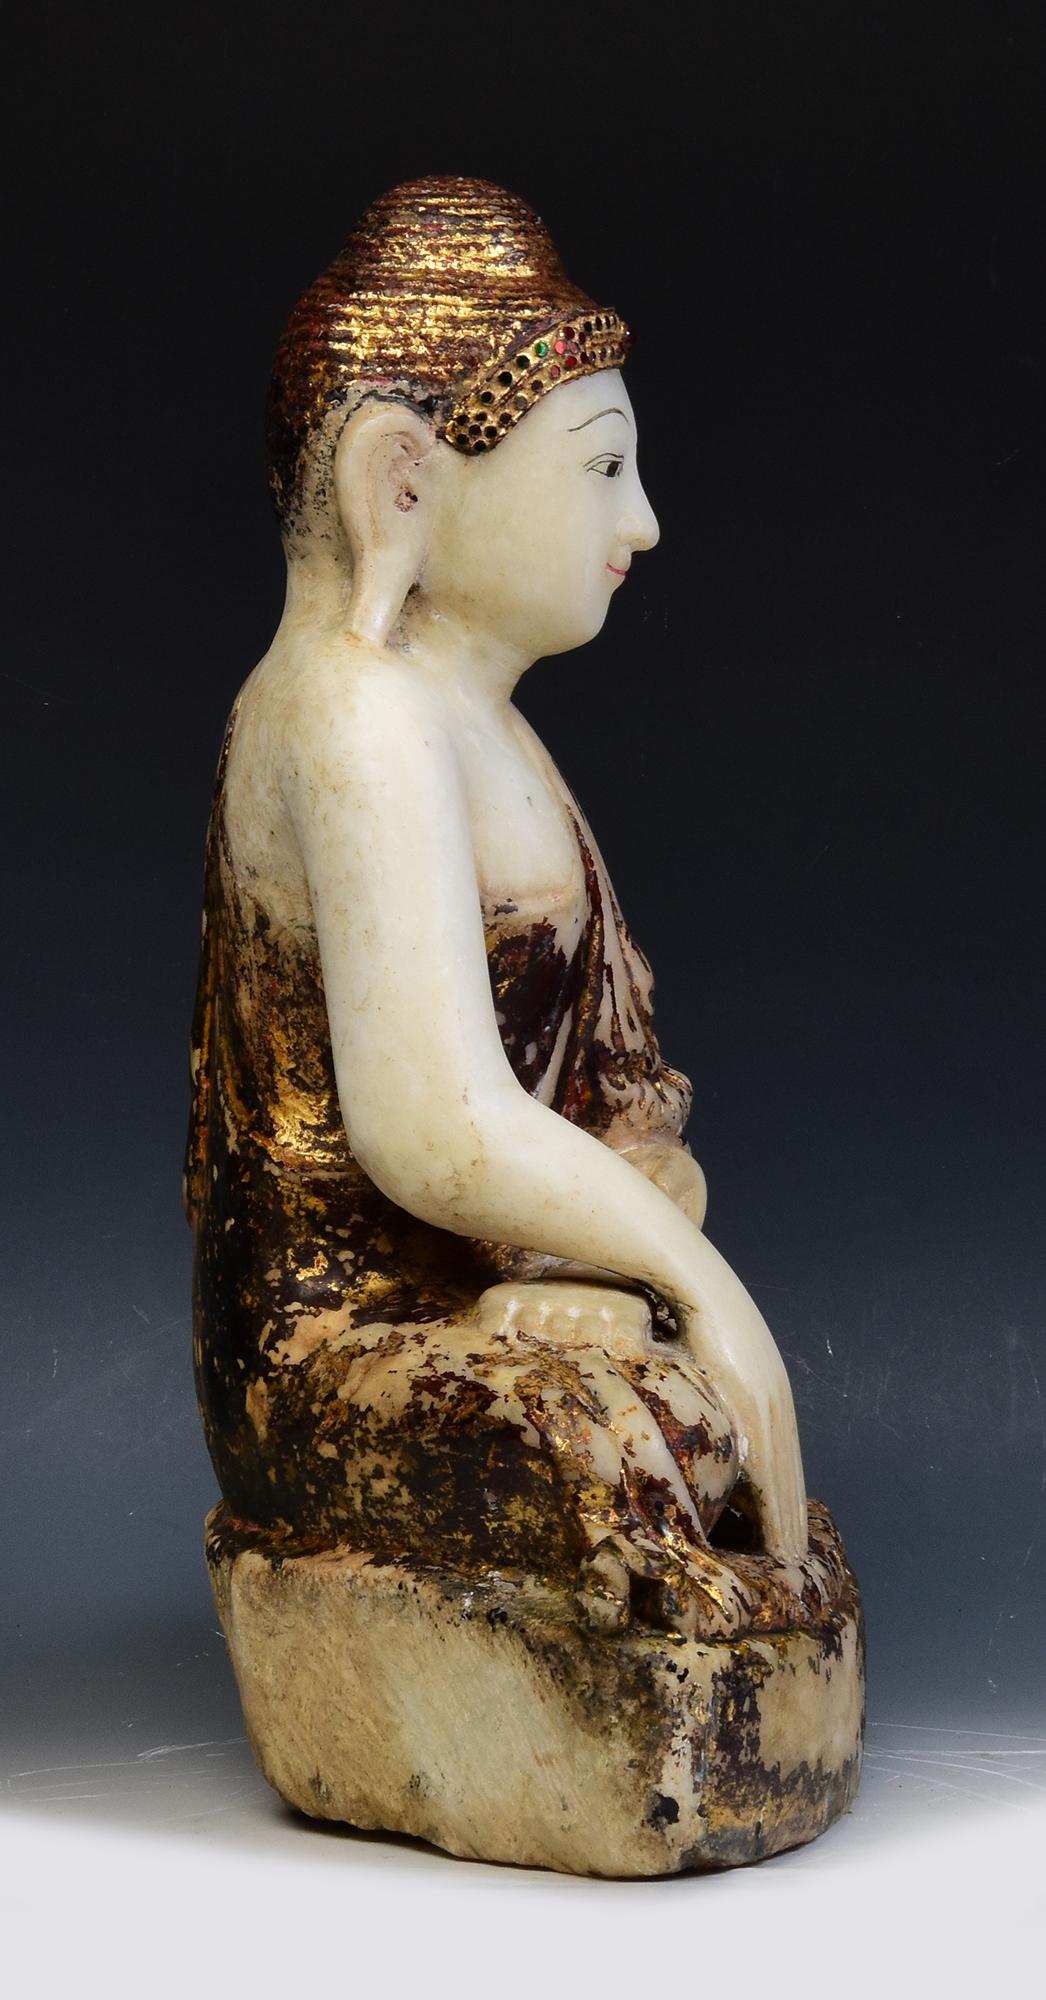 19th Century, Mandalay, Antique Burmese Alabaster Marble Seated Buddha Statue For Sale 8